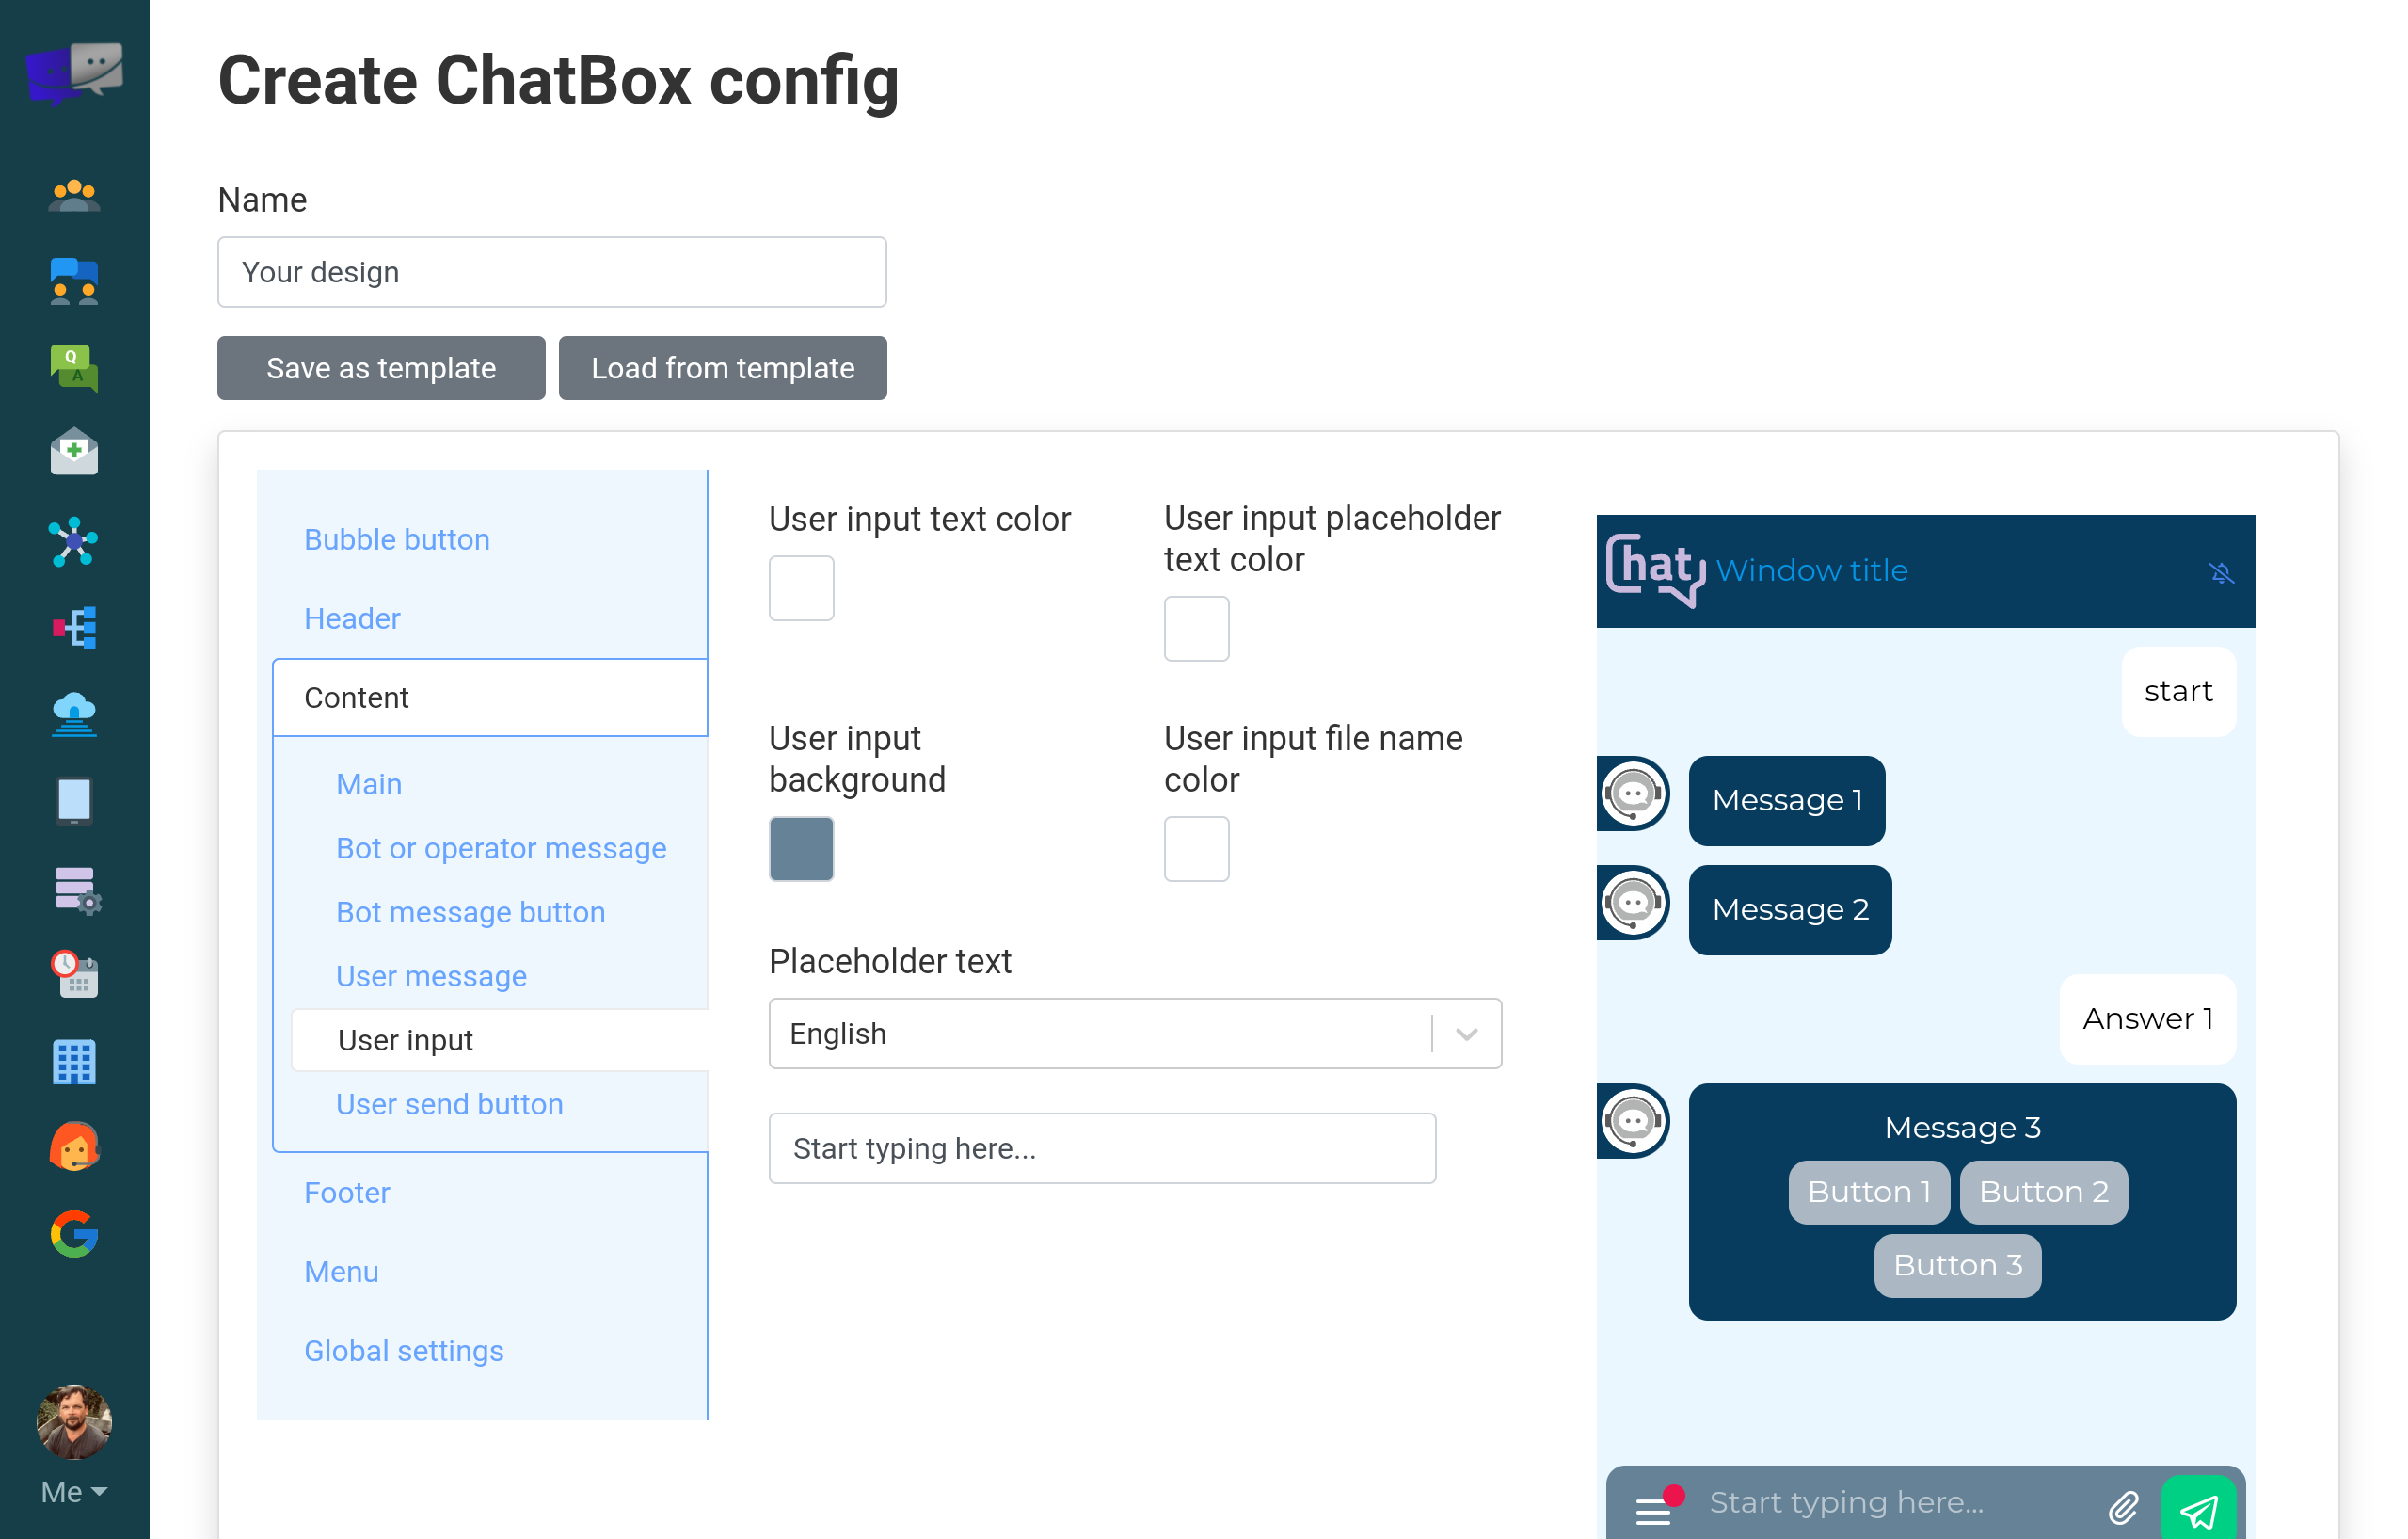 Live chat site